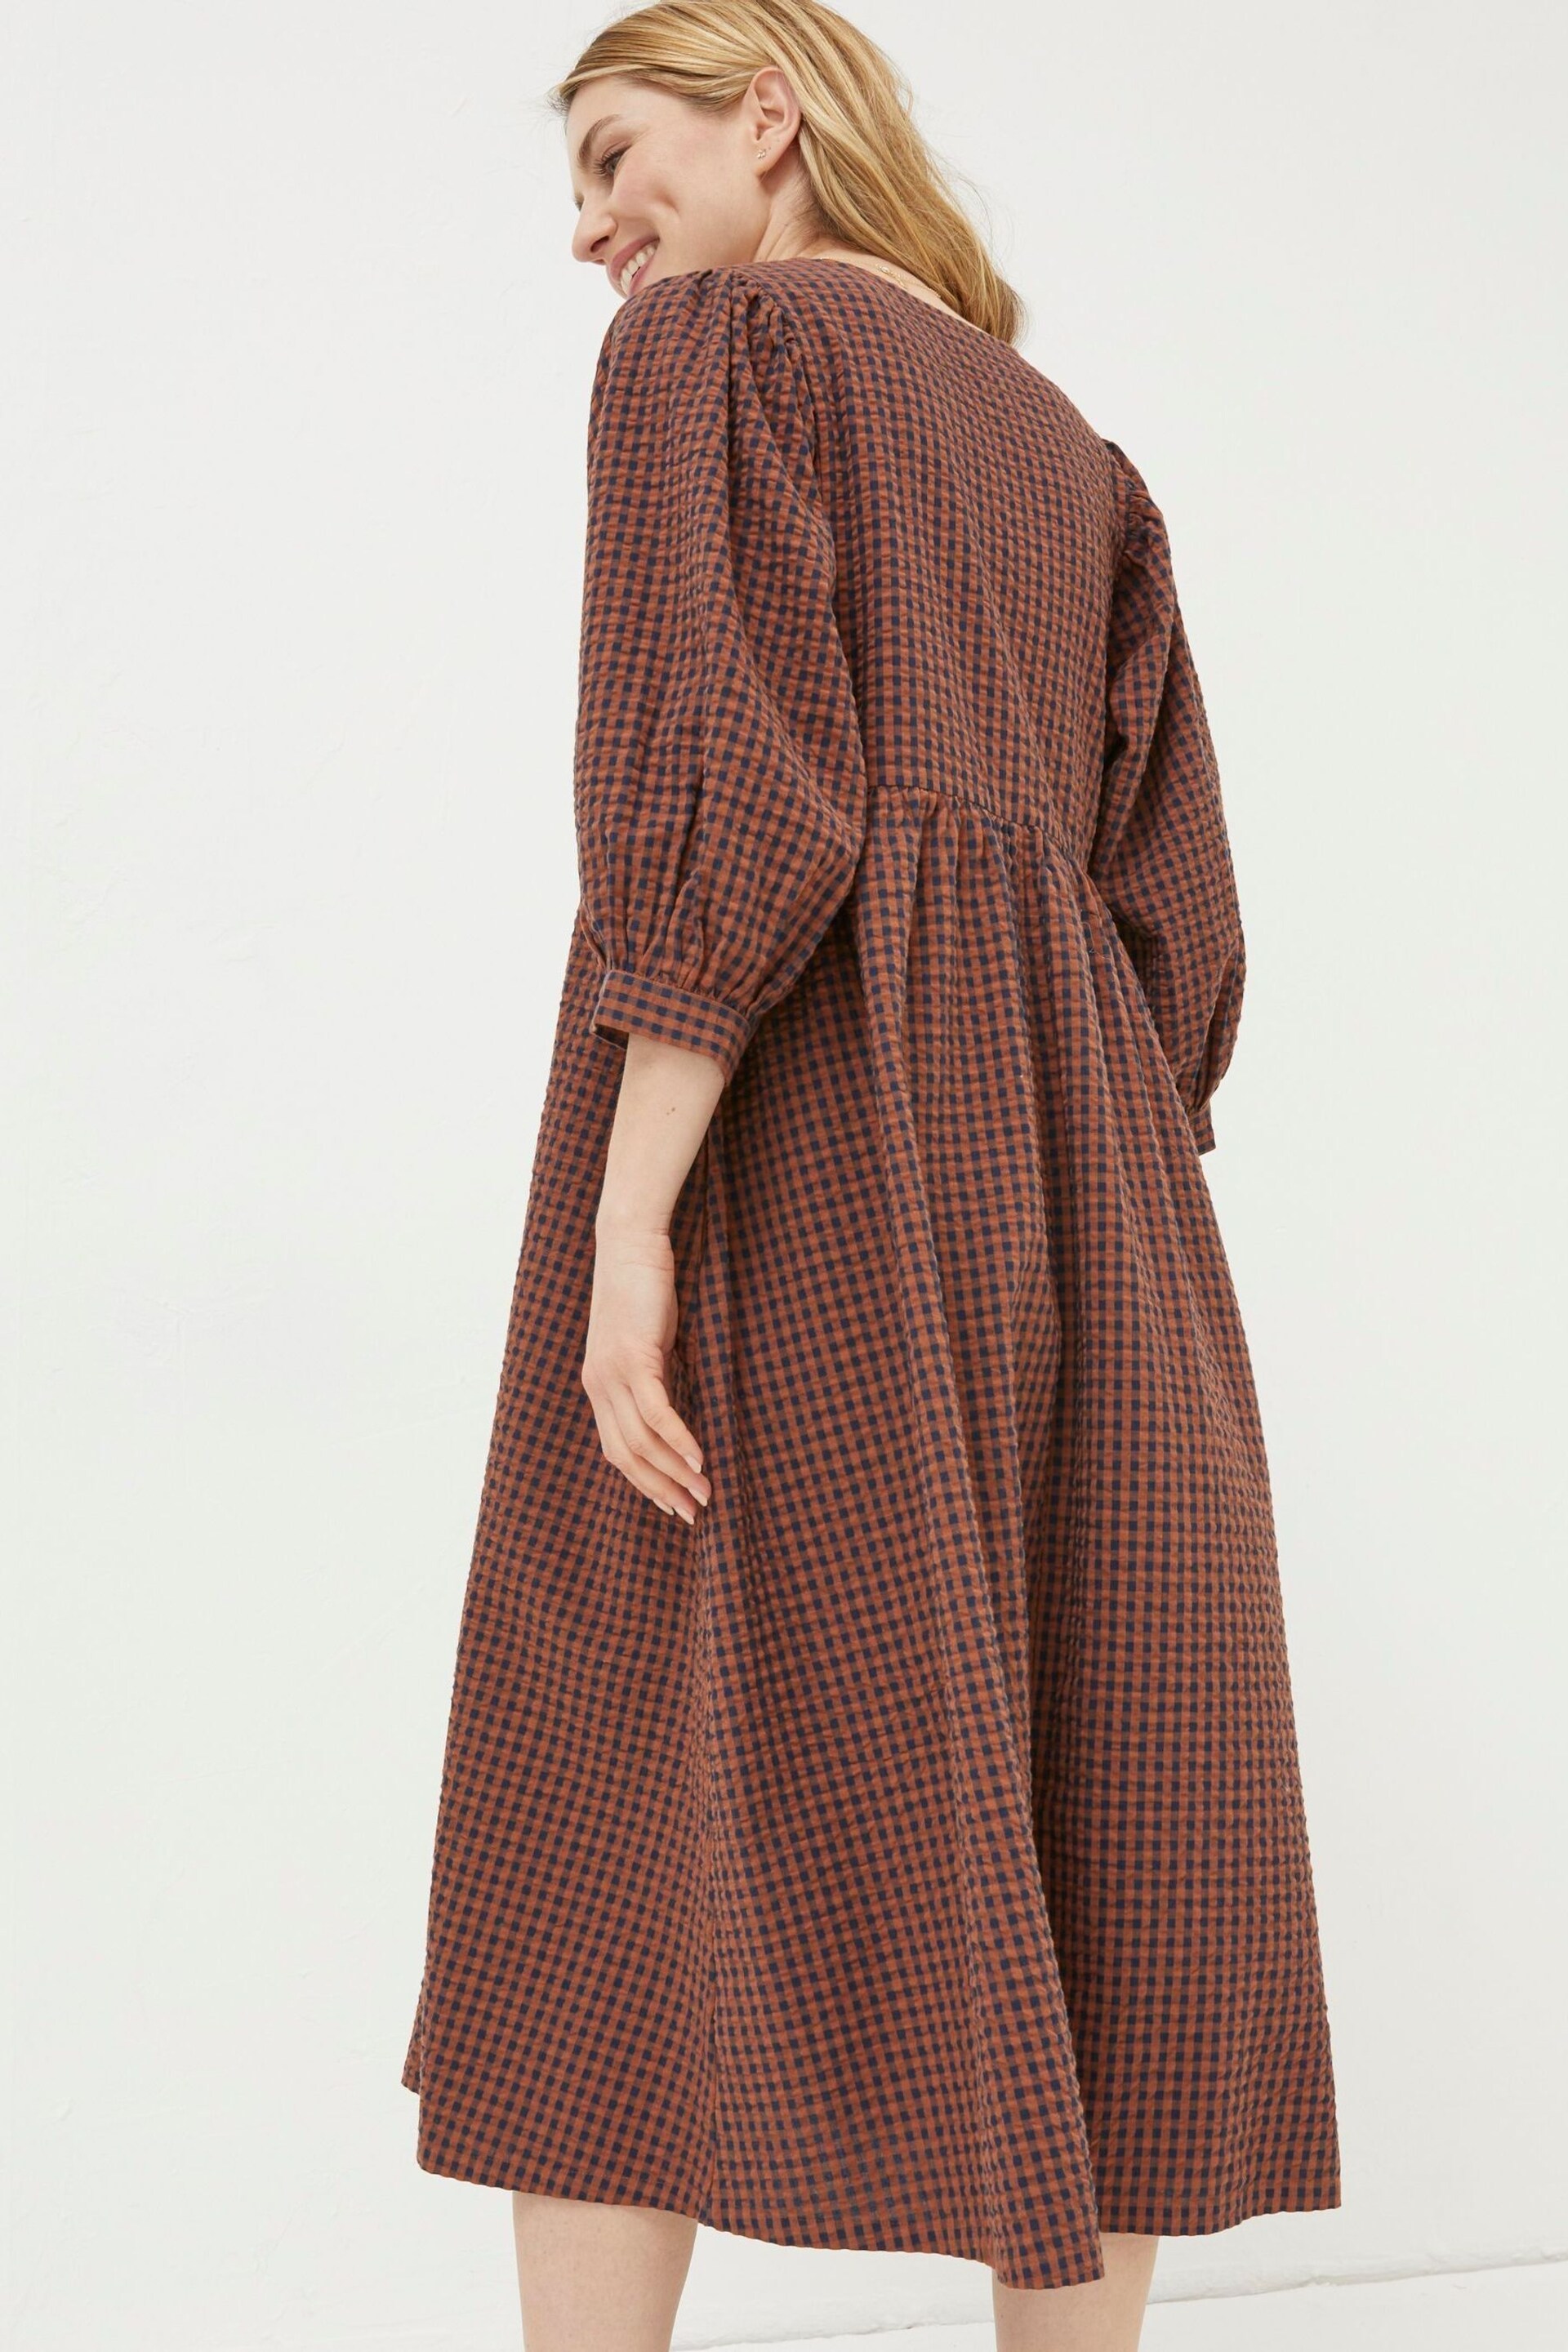 FatFace Brown Gingham Midi Dress - Image 3 of 7